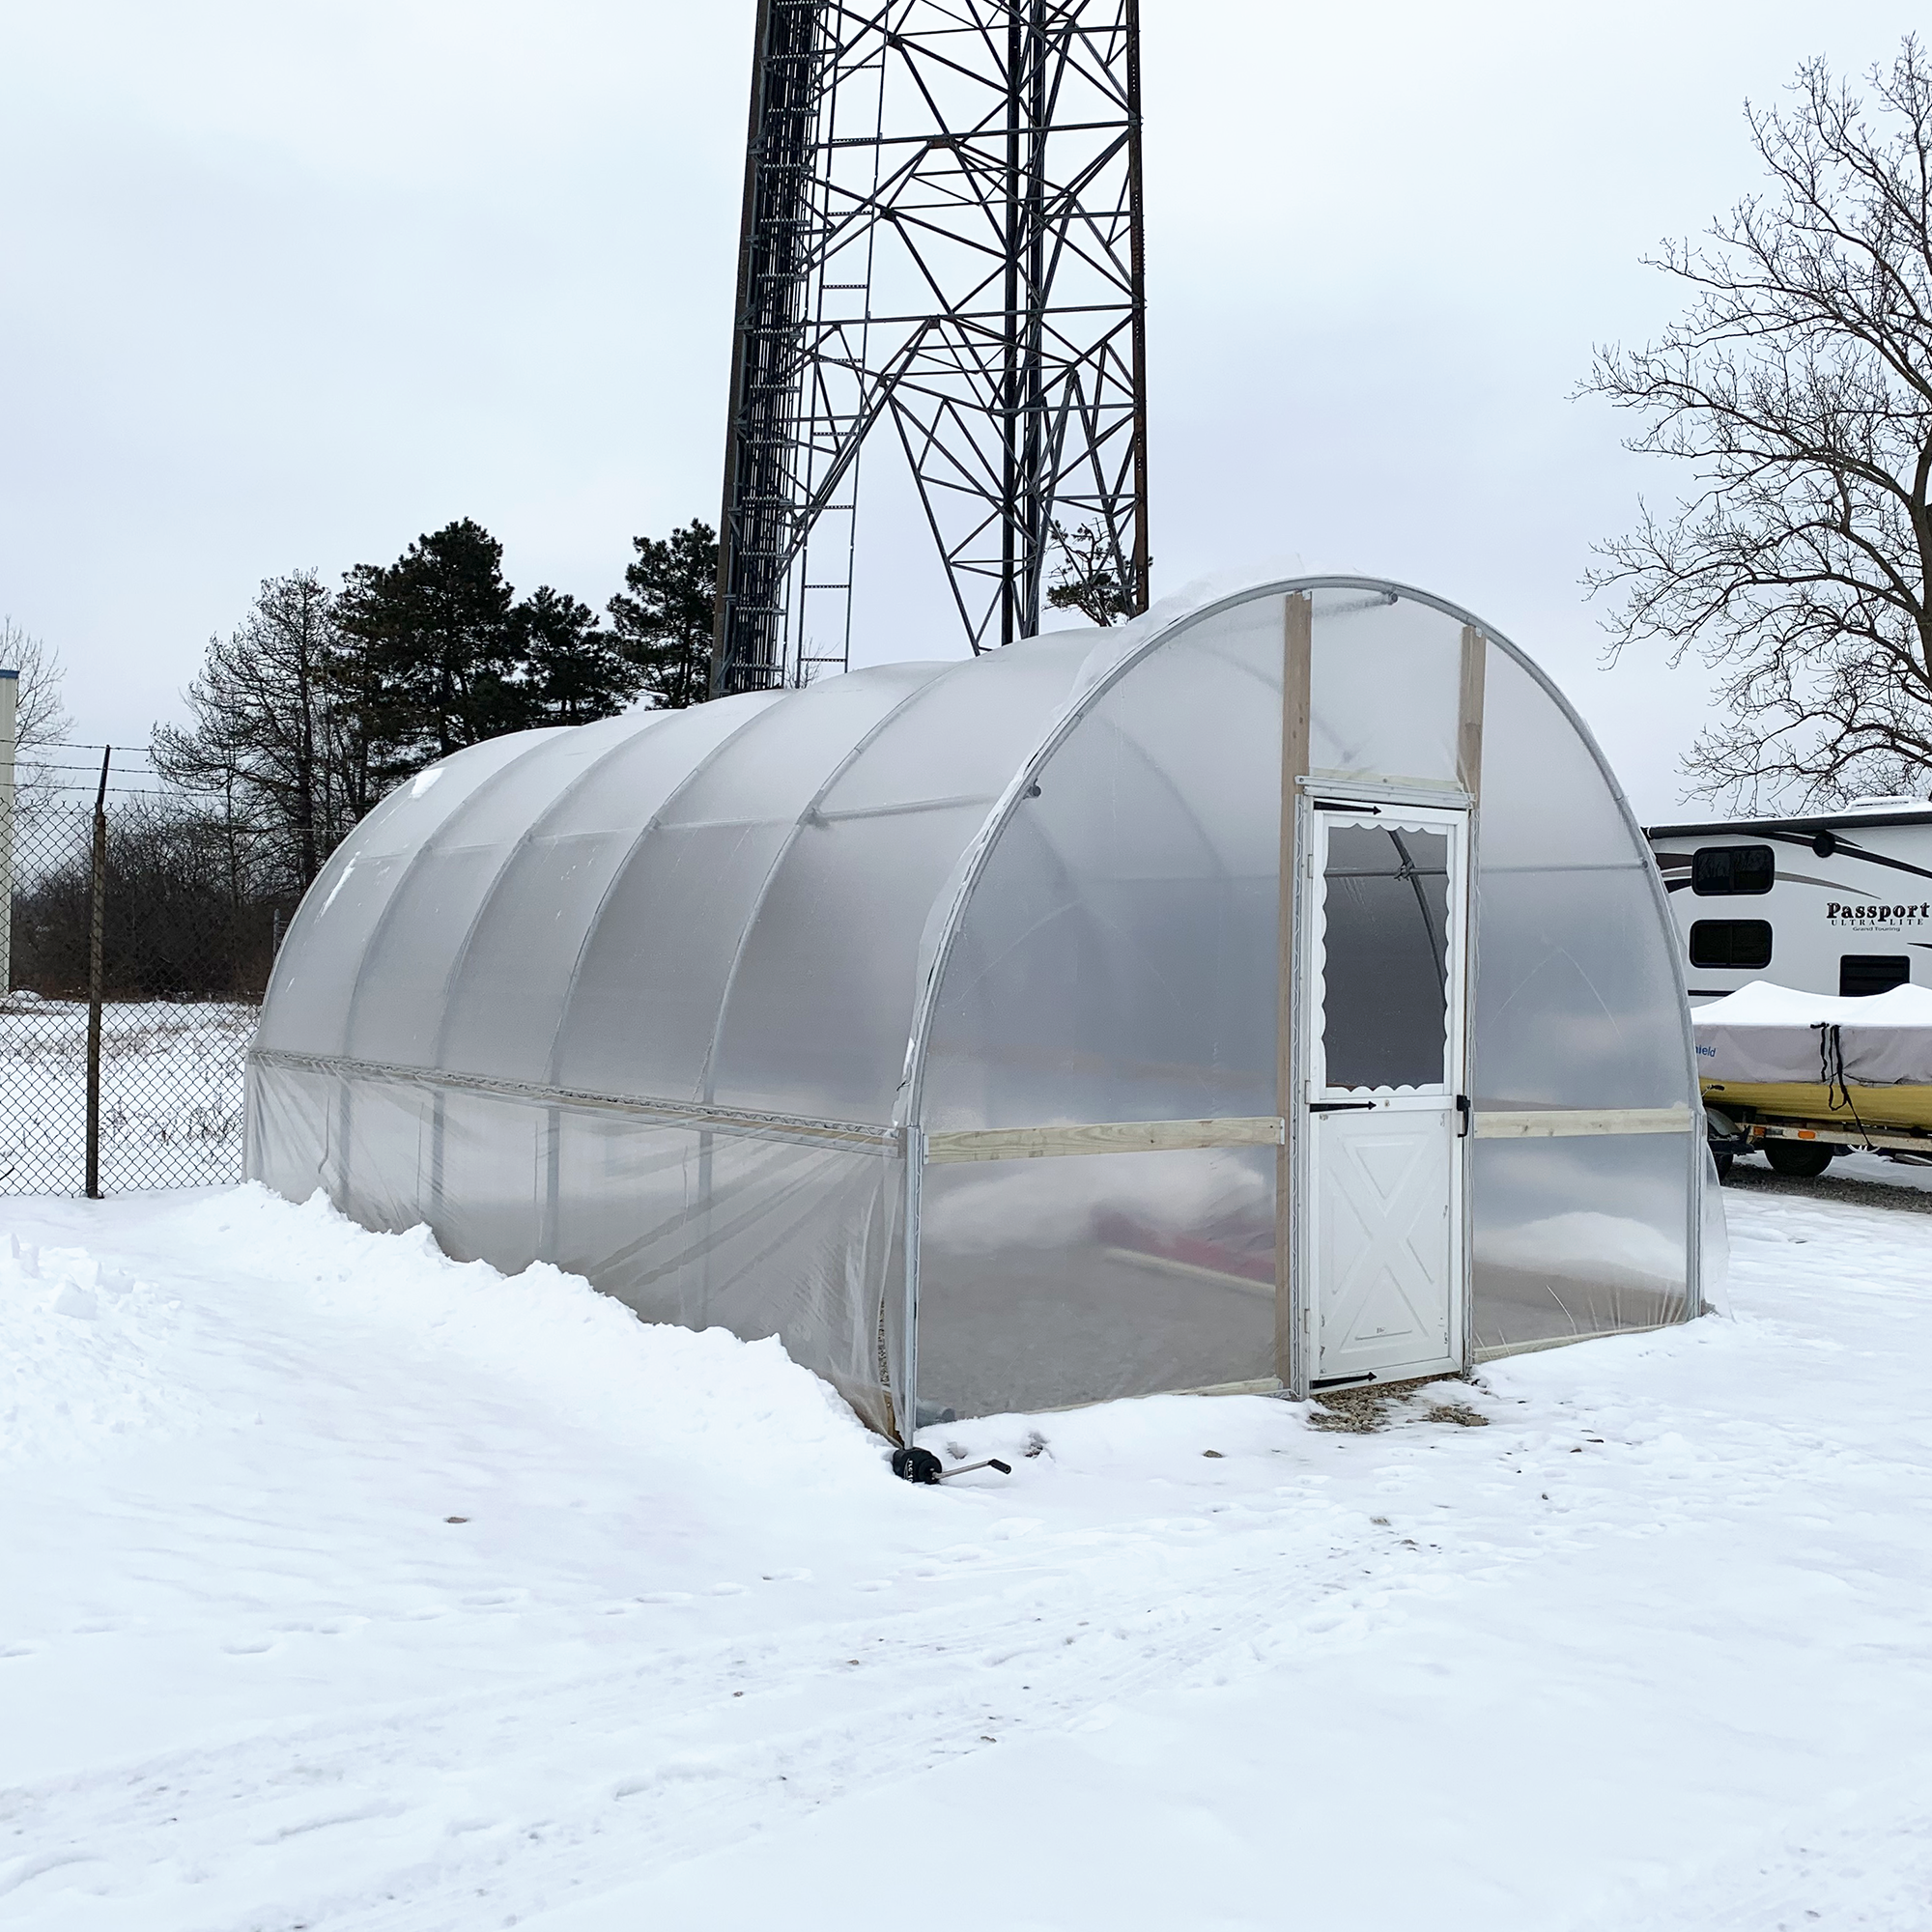 How To Survive Winter Using a Greenhouse